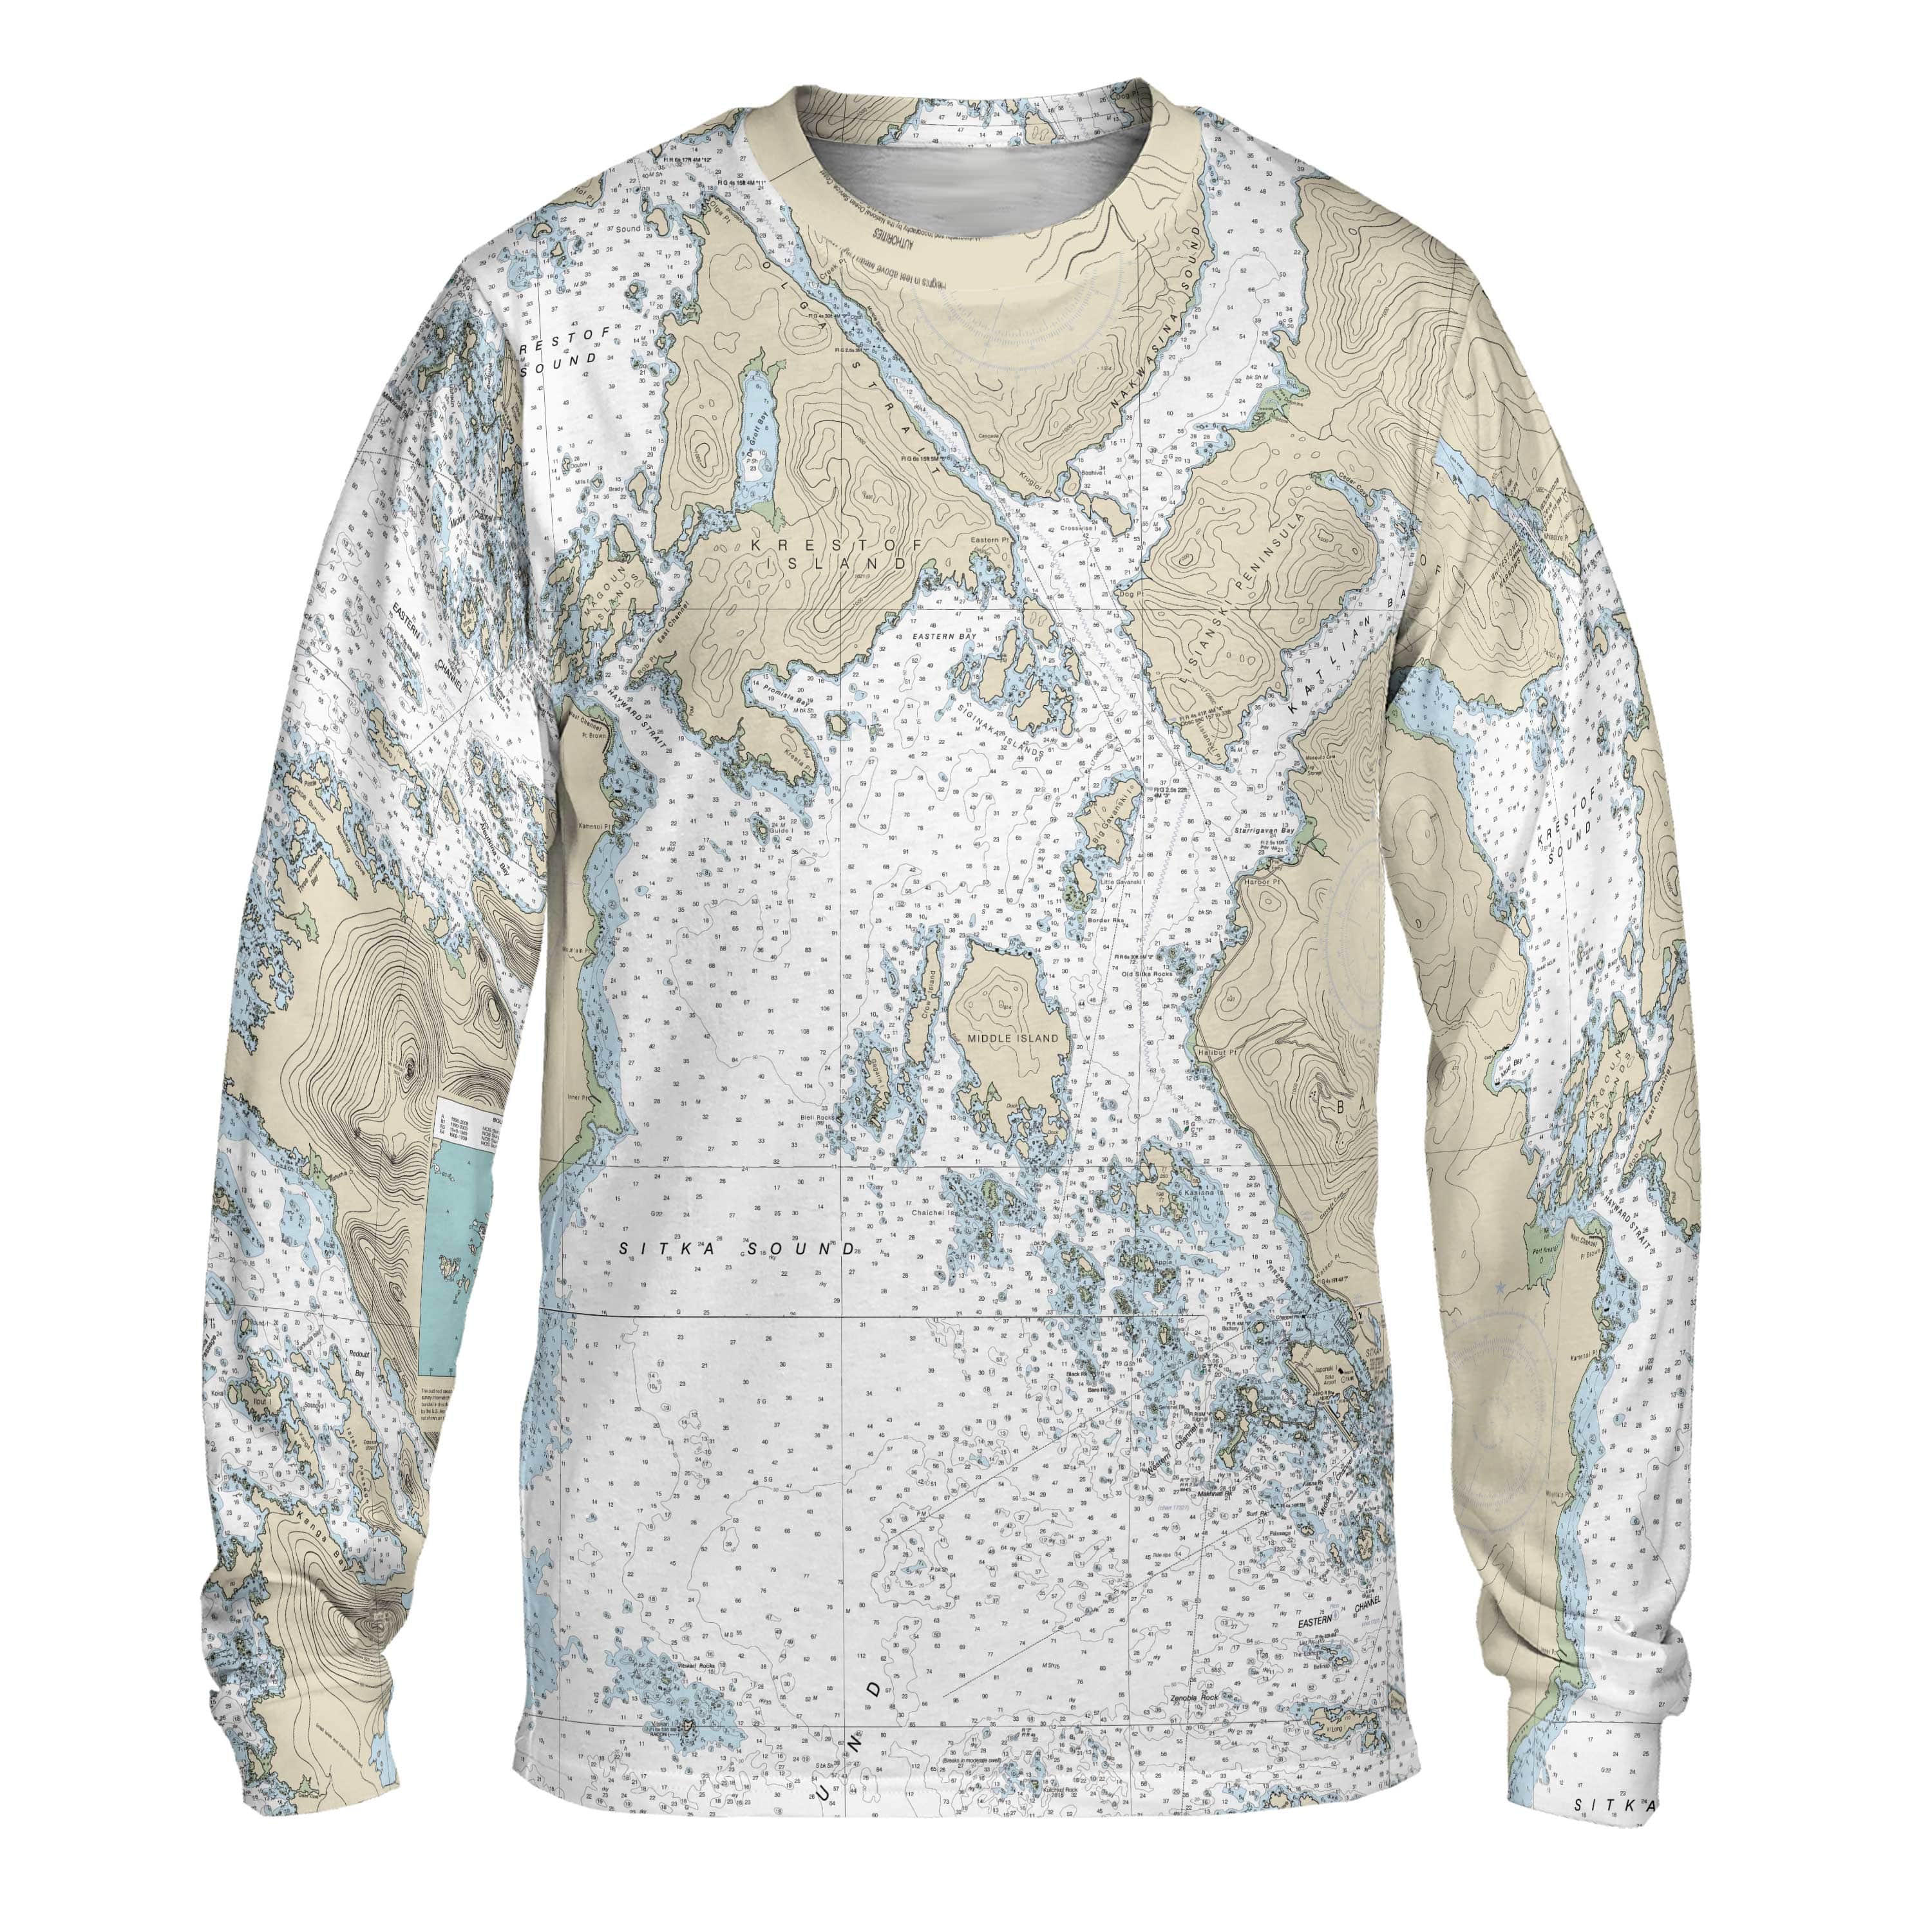 The Sitka Sound Long Sleeve Tee